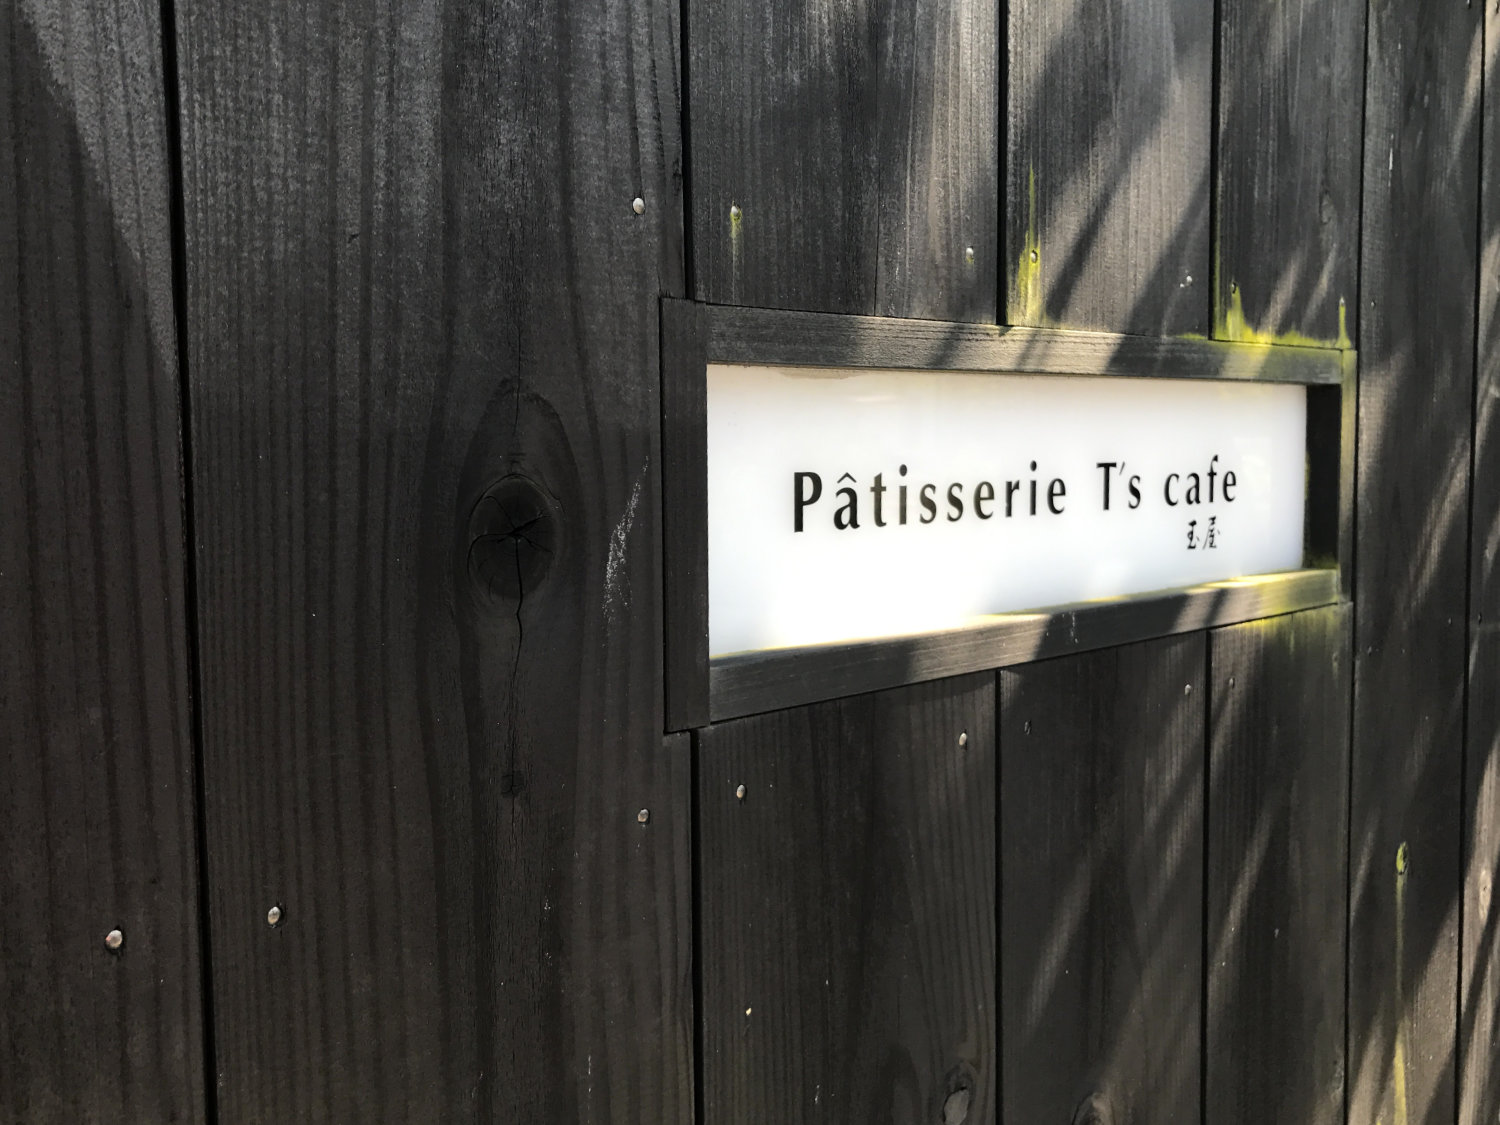 Patisserie T's cafe 玉屋の看板